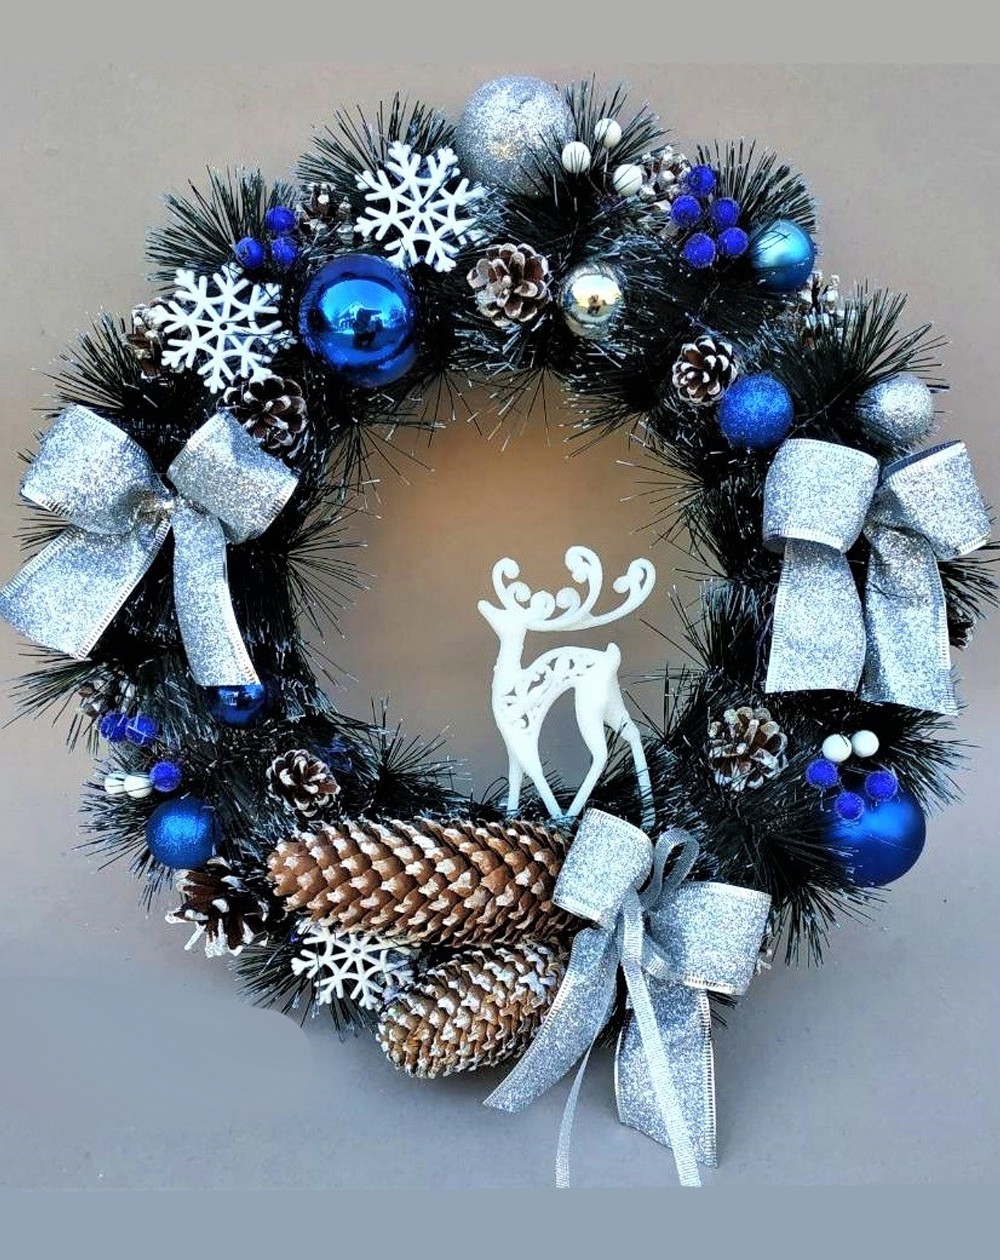 New Year's Christmas wreath 40 cm. Vela Handmade with natural holiday decor in branded packaging for gift by Designer "Deer" Blue